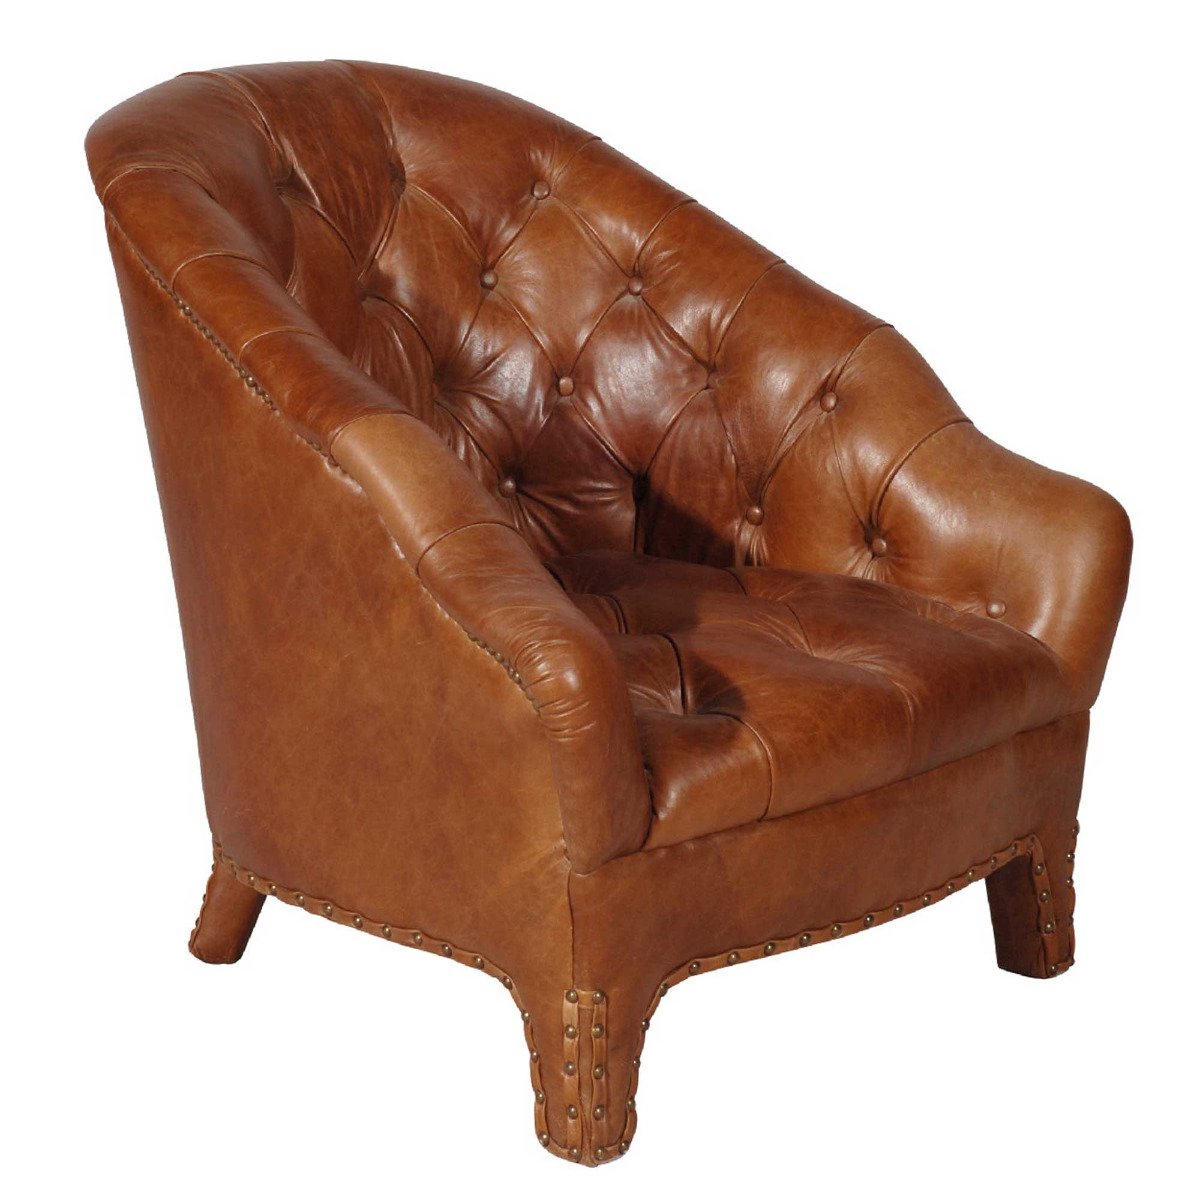 Timothy Oulton Branco Tub Chair, Brown Leather | Barker & Stonehouse